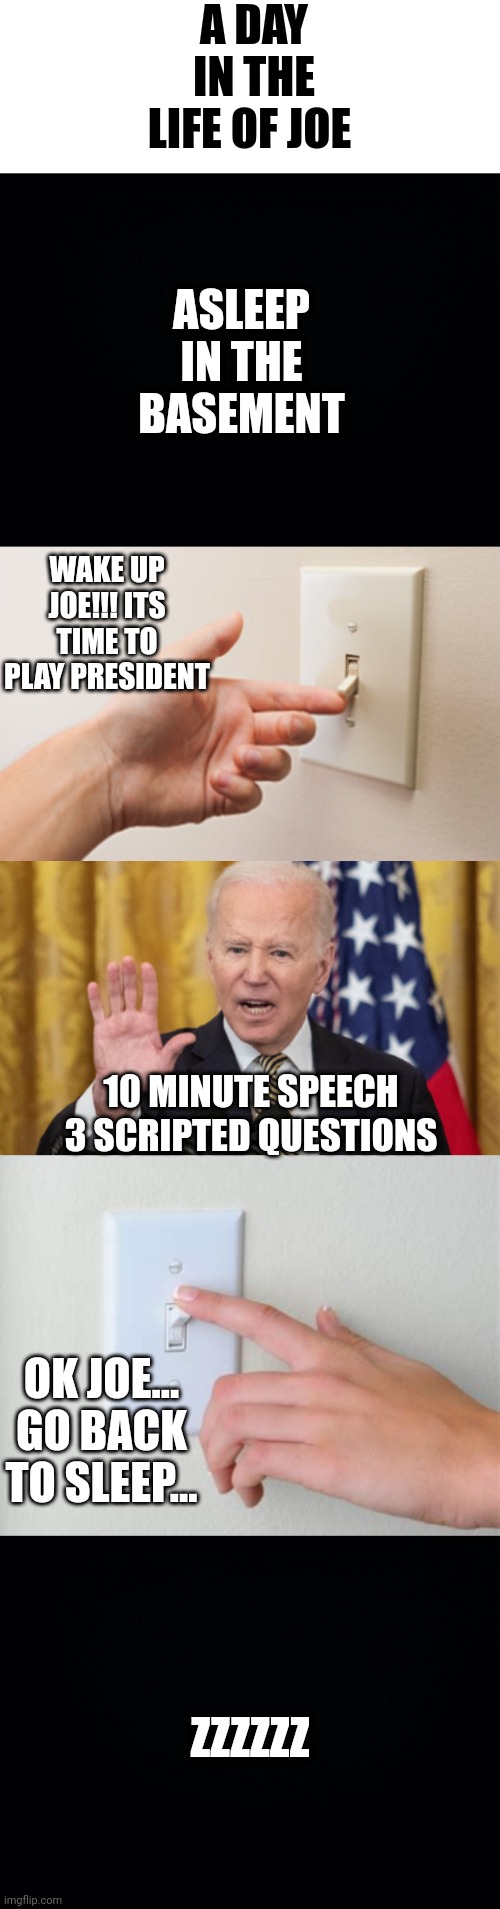 A DAY IN THE LIFE OF JOE; ASLEEP IN THE BASEMENT; WAKE UP JOE!!! ITS TIME TO PLAY PRESIDENT; 10 MINUTE SPEECH 3 SCRIPTED QUESTIONS; OK JOE... GO BACK TO SLEEP... ZZZZZZ | image tagged in black background | made w/ Imgflip meme maker